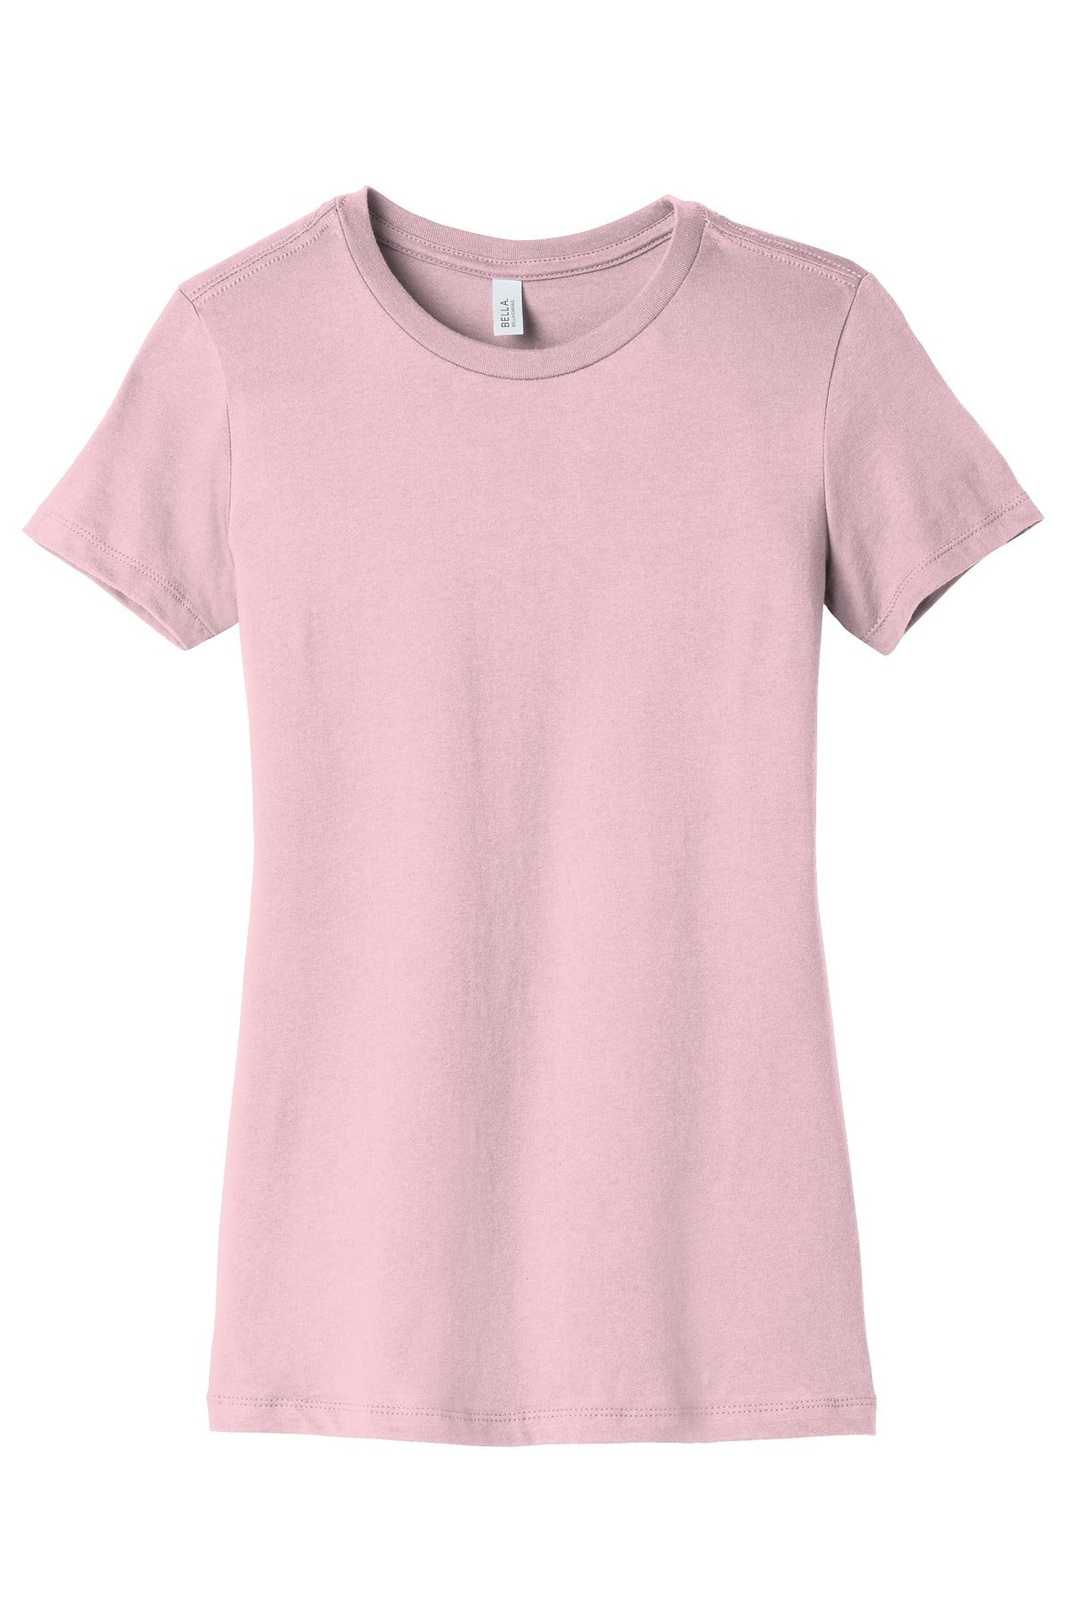 Bella + Canvas 6004 Women's The Favorite Tee - Pink - HIT a Double